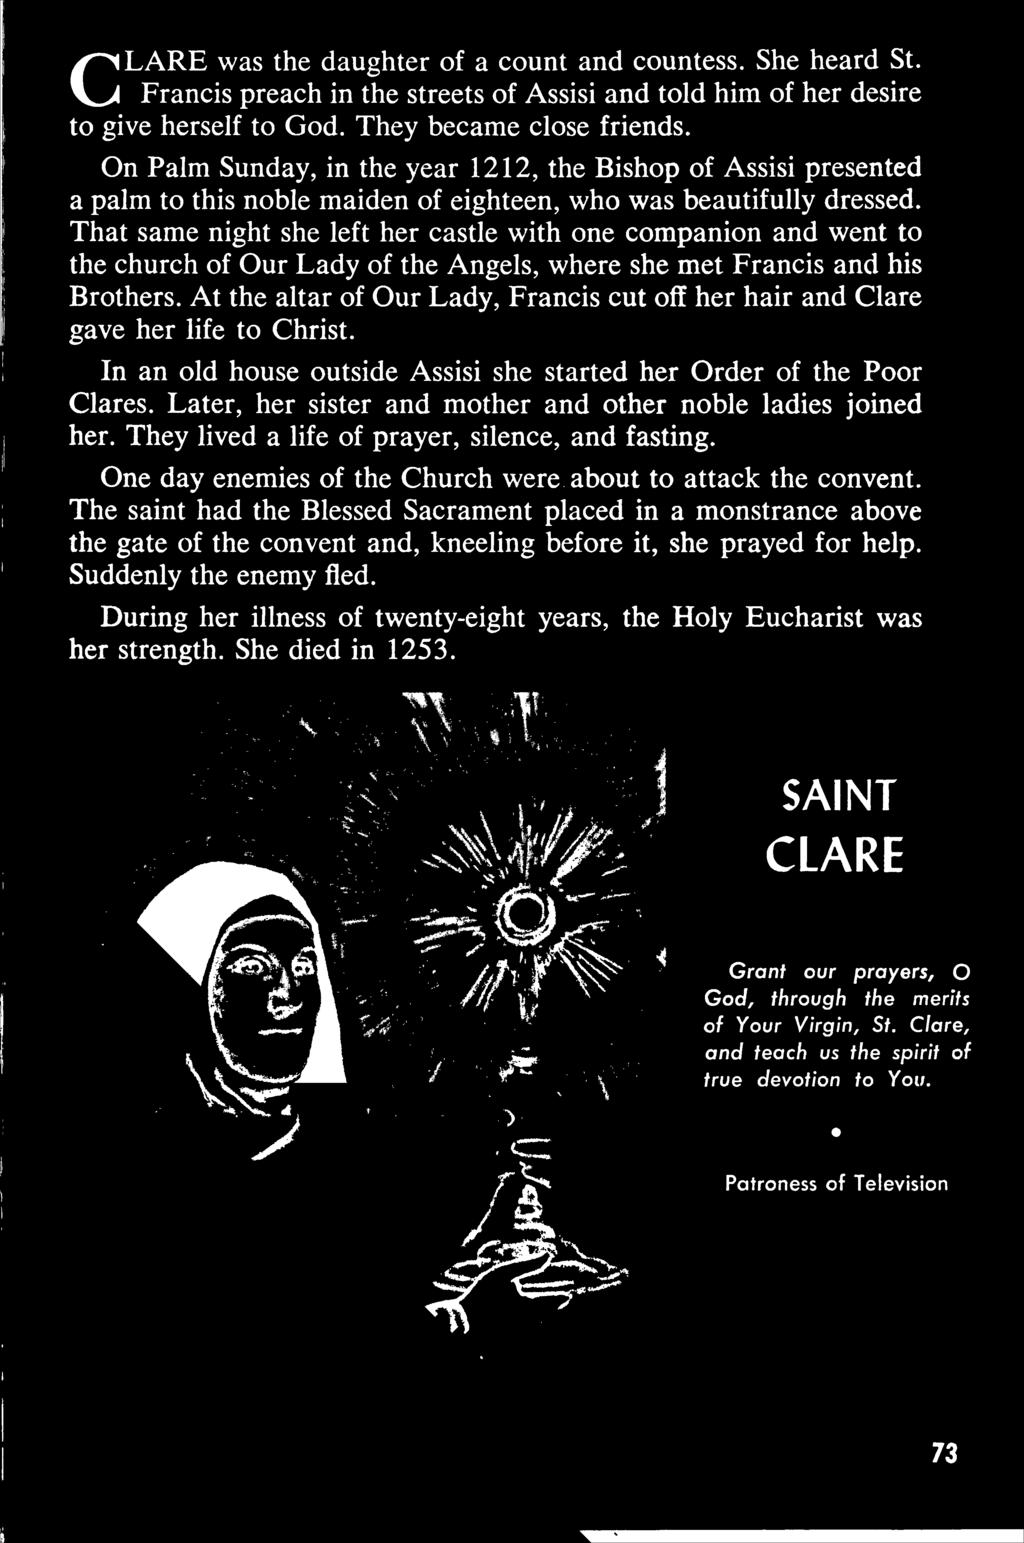 CLARE was the daughter of a count and countess. She heard St. Francis preach in the streets of Assisi and told him of her desire to give herself to God. They became close friends.